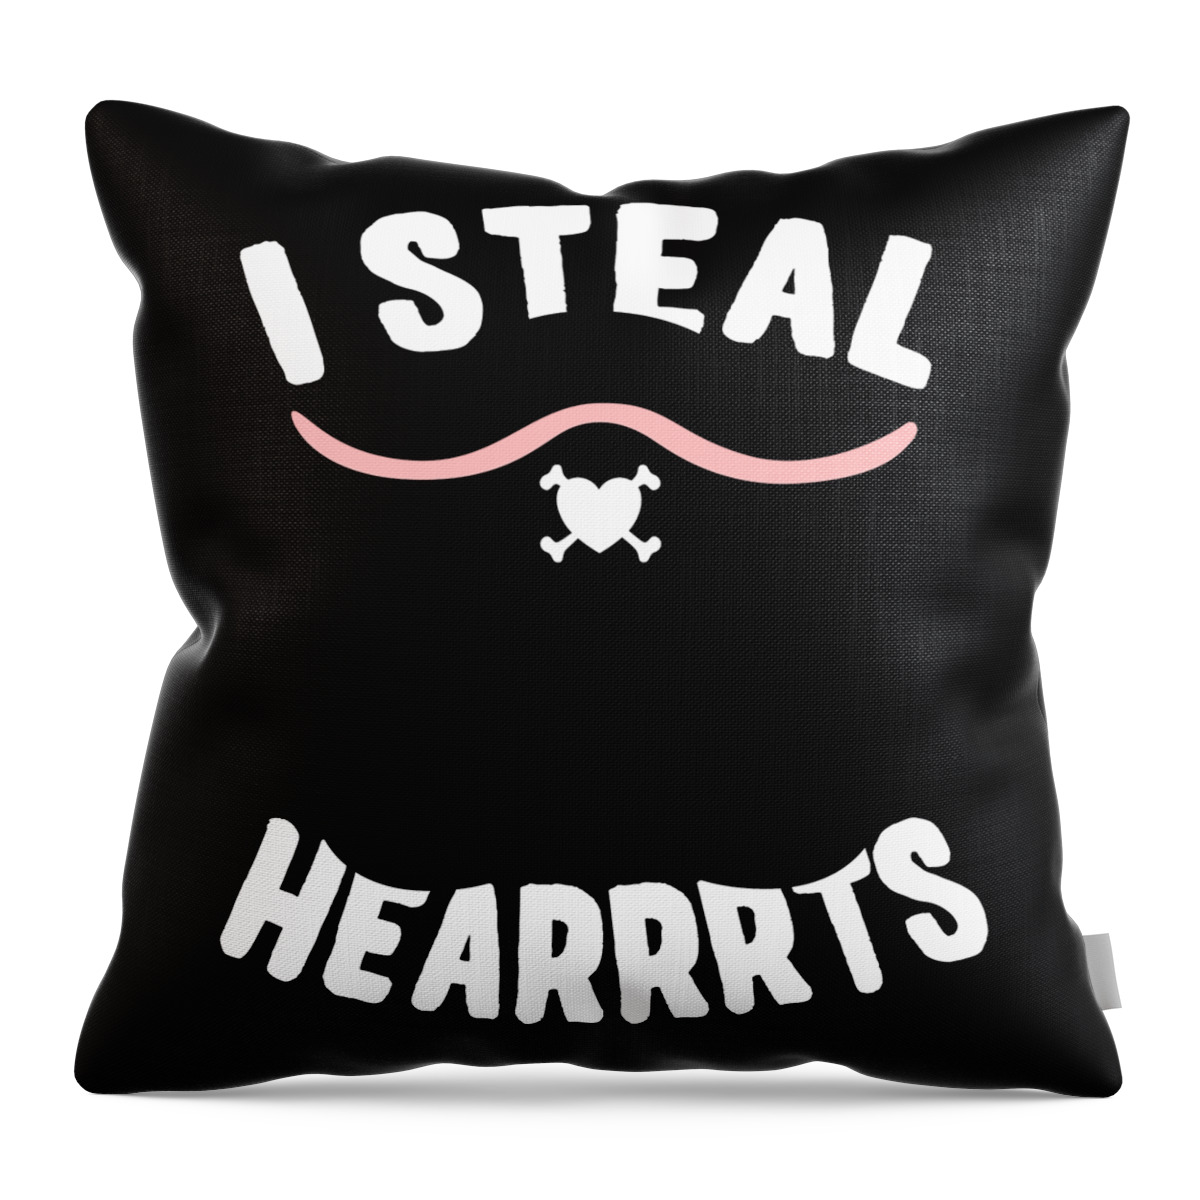 Cool Throw Pillow featuring the digital art I Steal Hearrrts Valentines Pirate by Flippin Sweet Gear